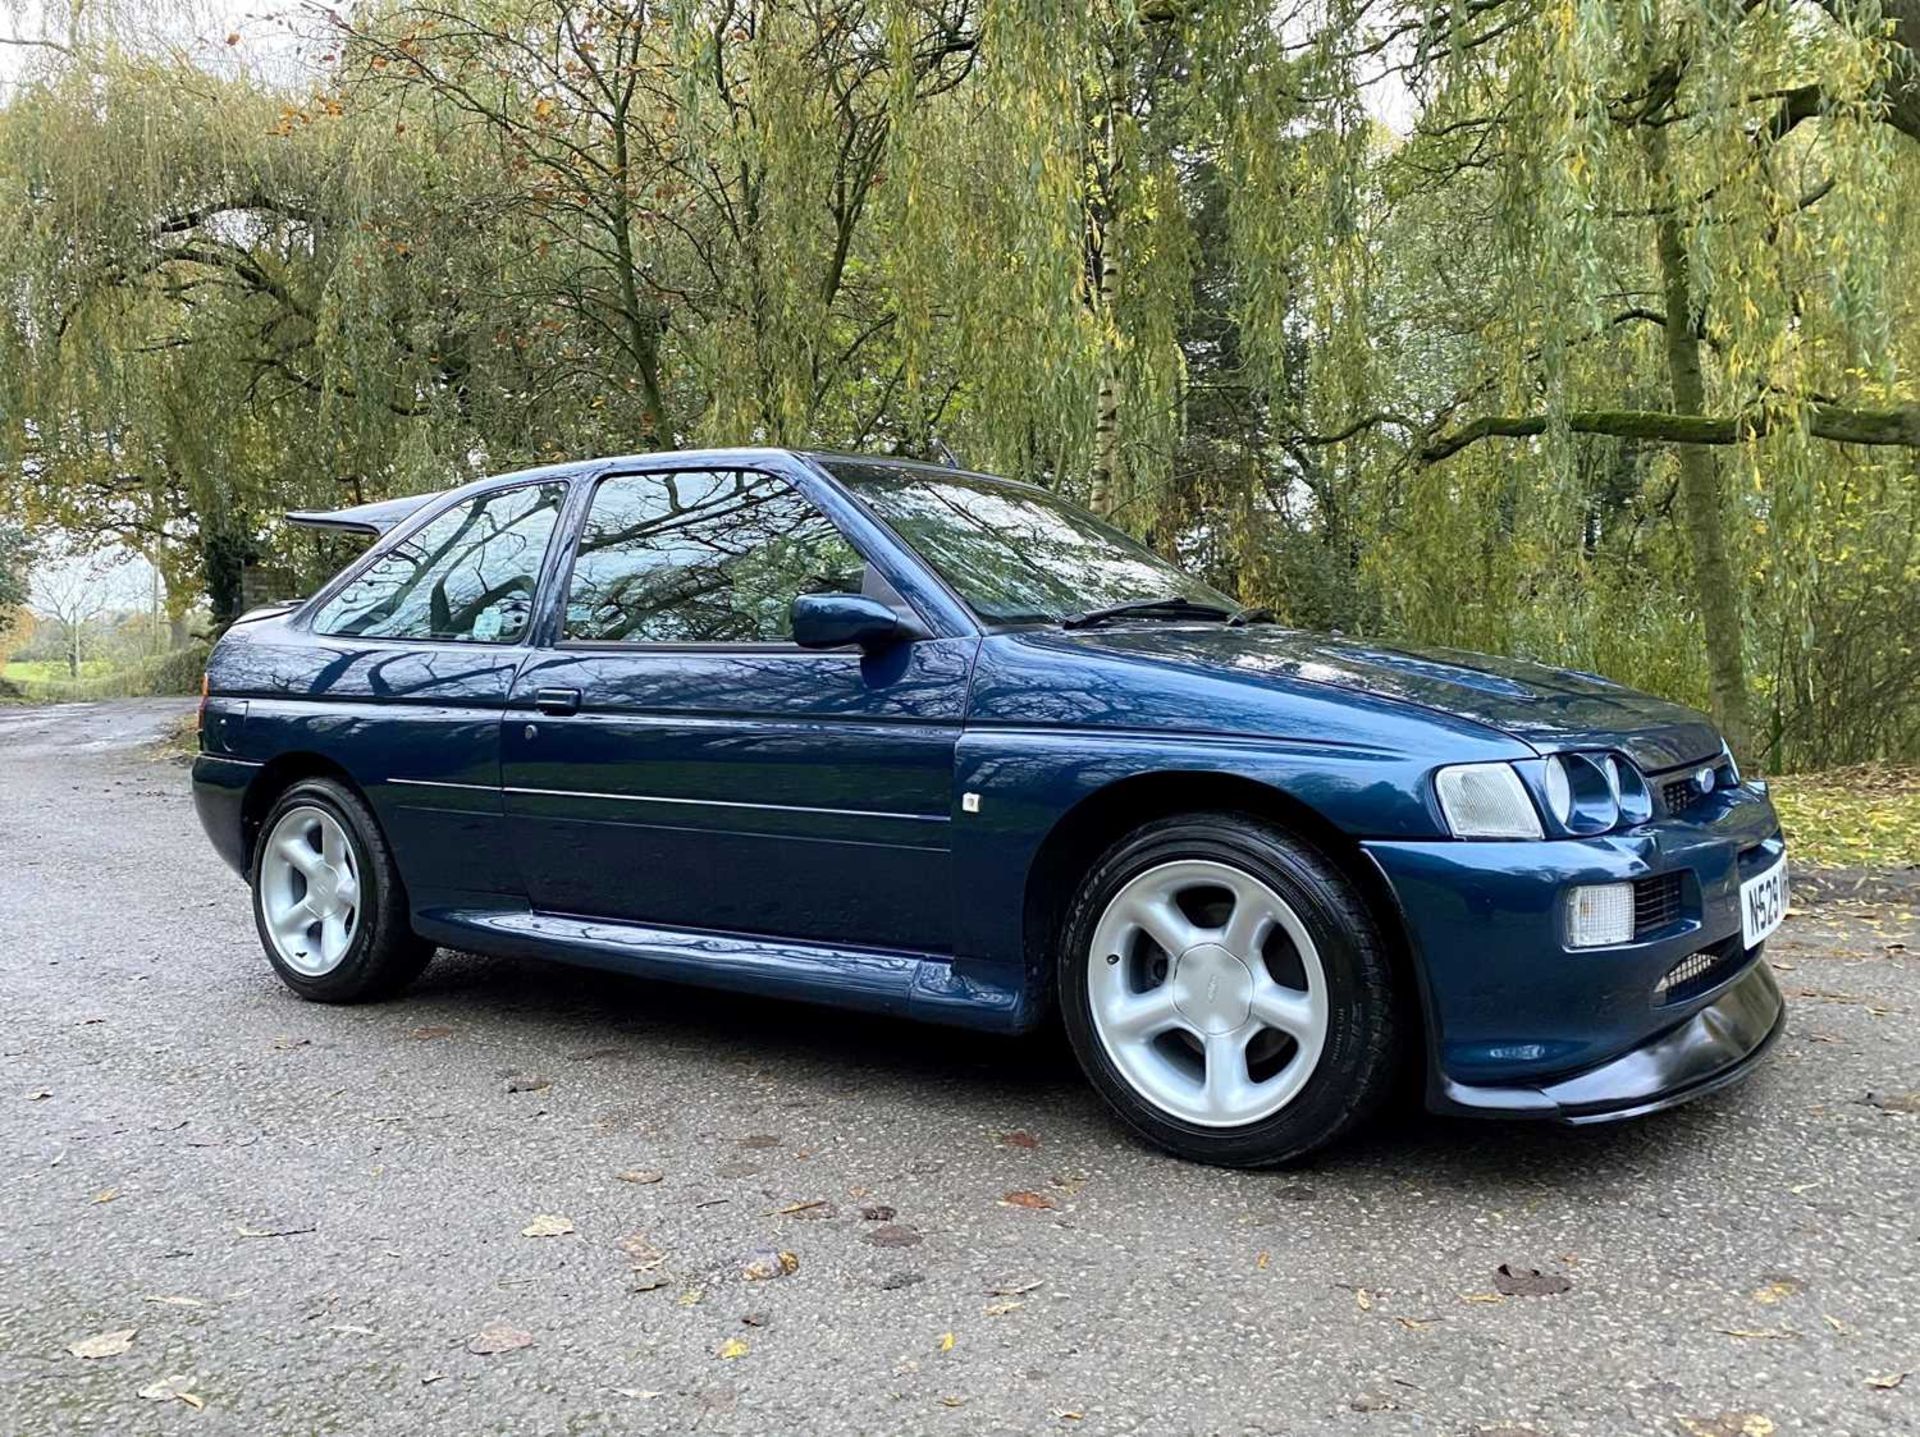 1995 Ford Escort RS Cosworth LUX Only 56,000 miles, finished in rare Petrol Blue - Image 9 of 98